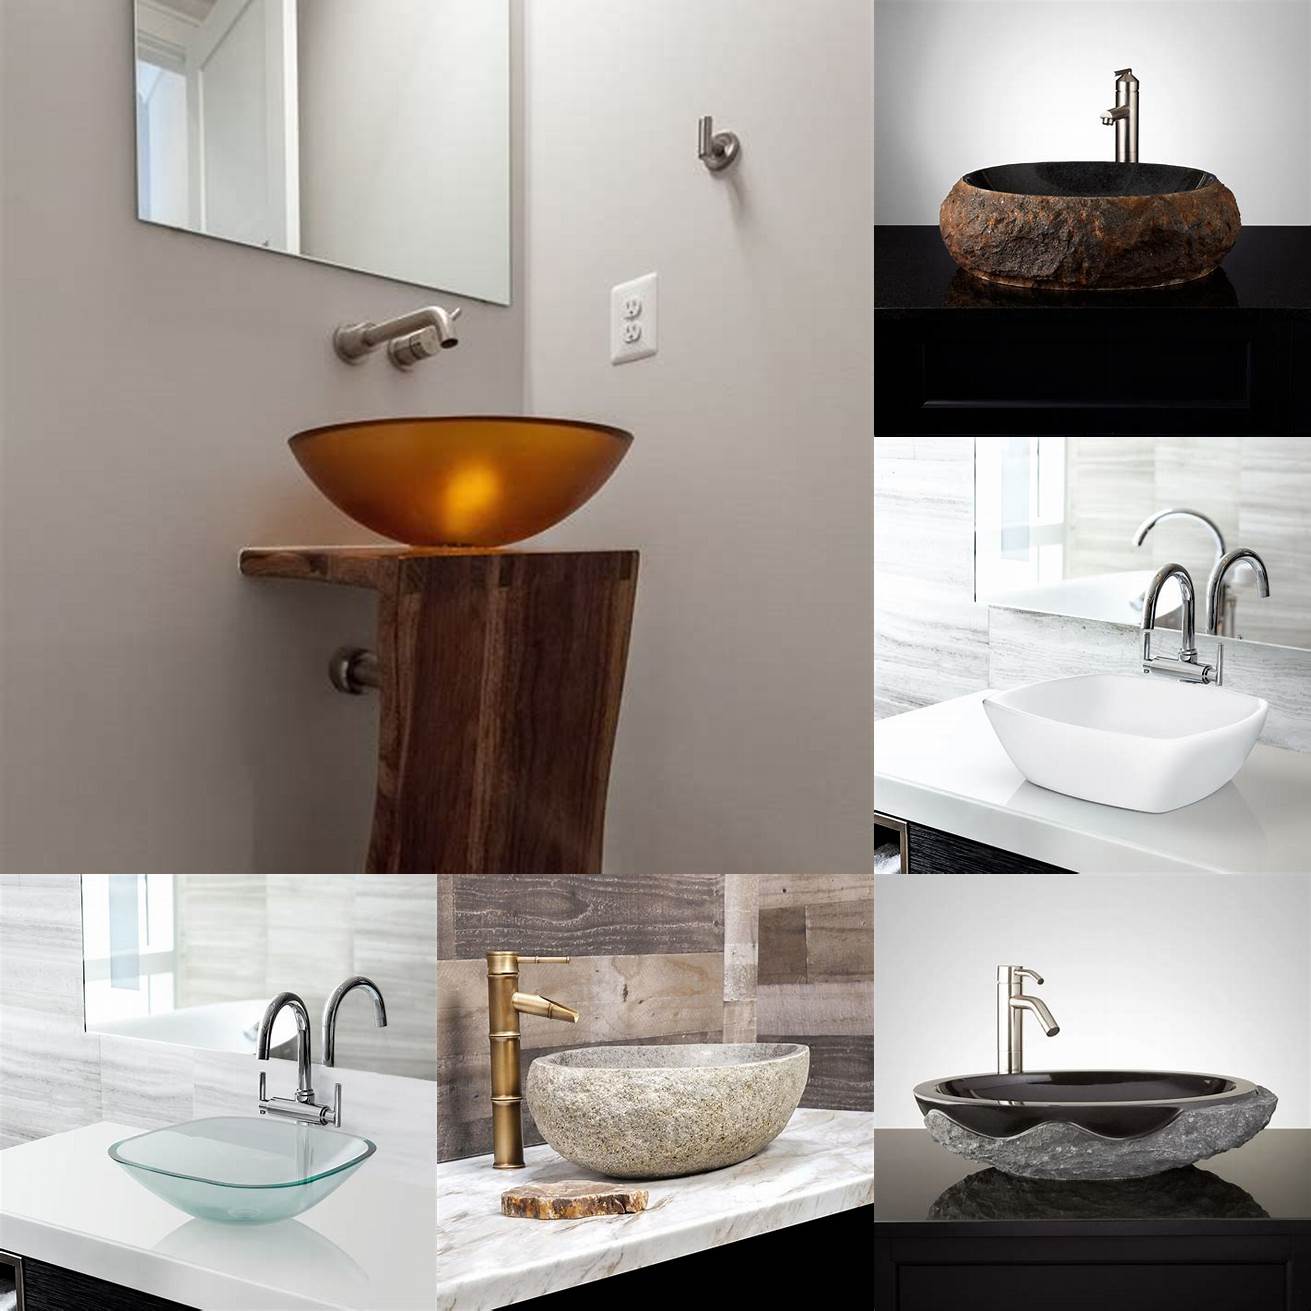 A vessel sink adds a contemporary touch and saves counter space